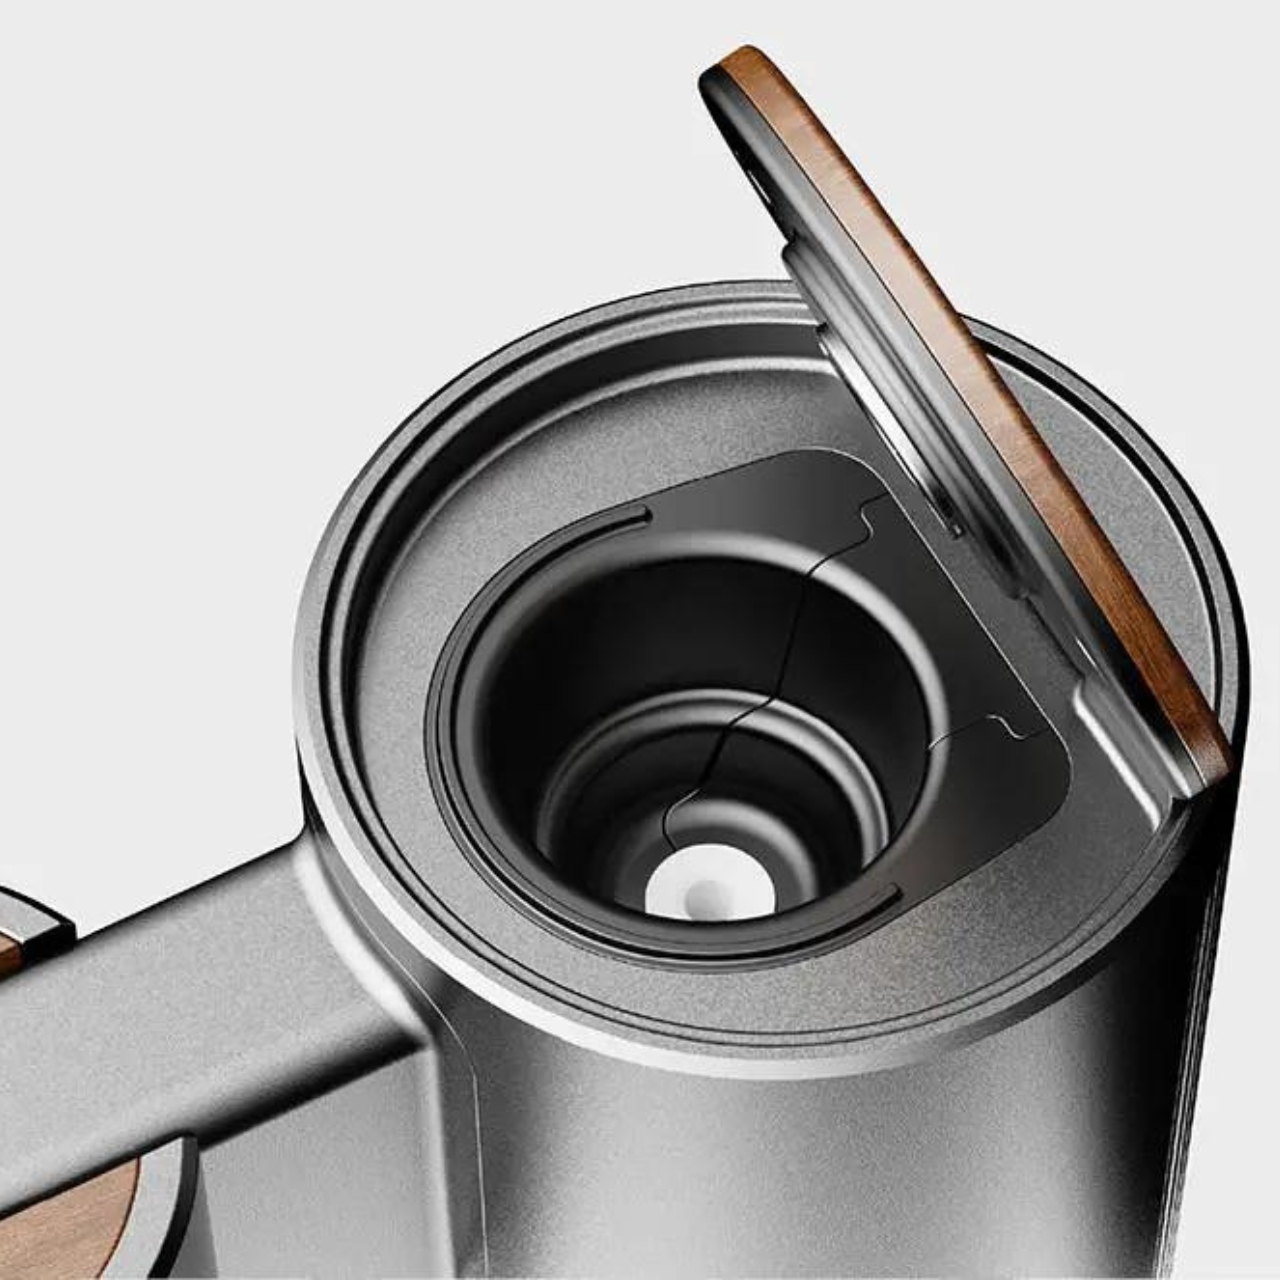 https://www.yankodesign.com/images/design_news/2023/09/portable-capsule-coffee-machine-lets-you-be-caffeinated-in-automated-cars/4.jpg